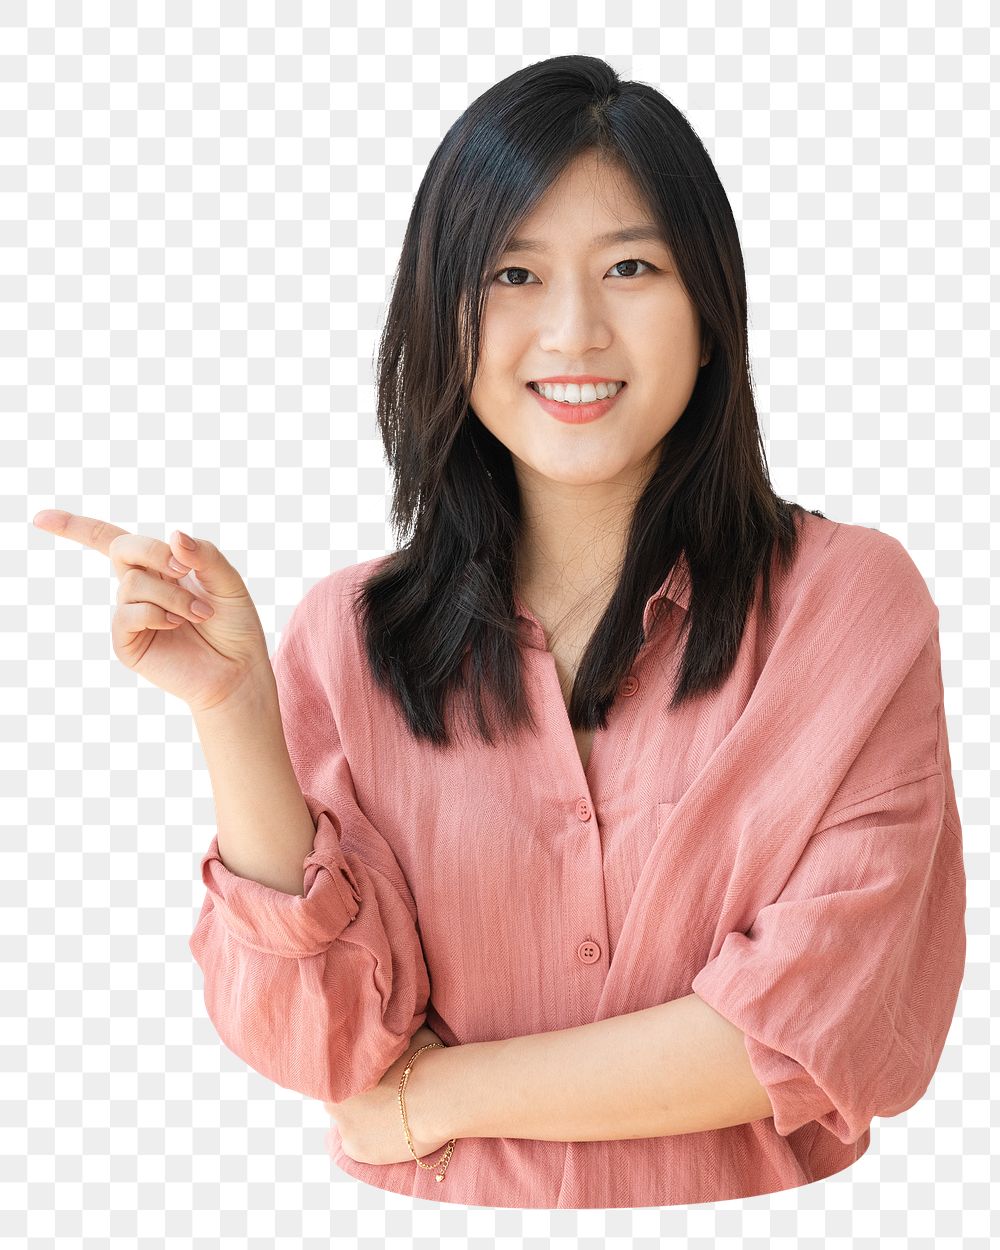 Asian woman png sticker, transparent background